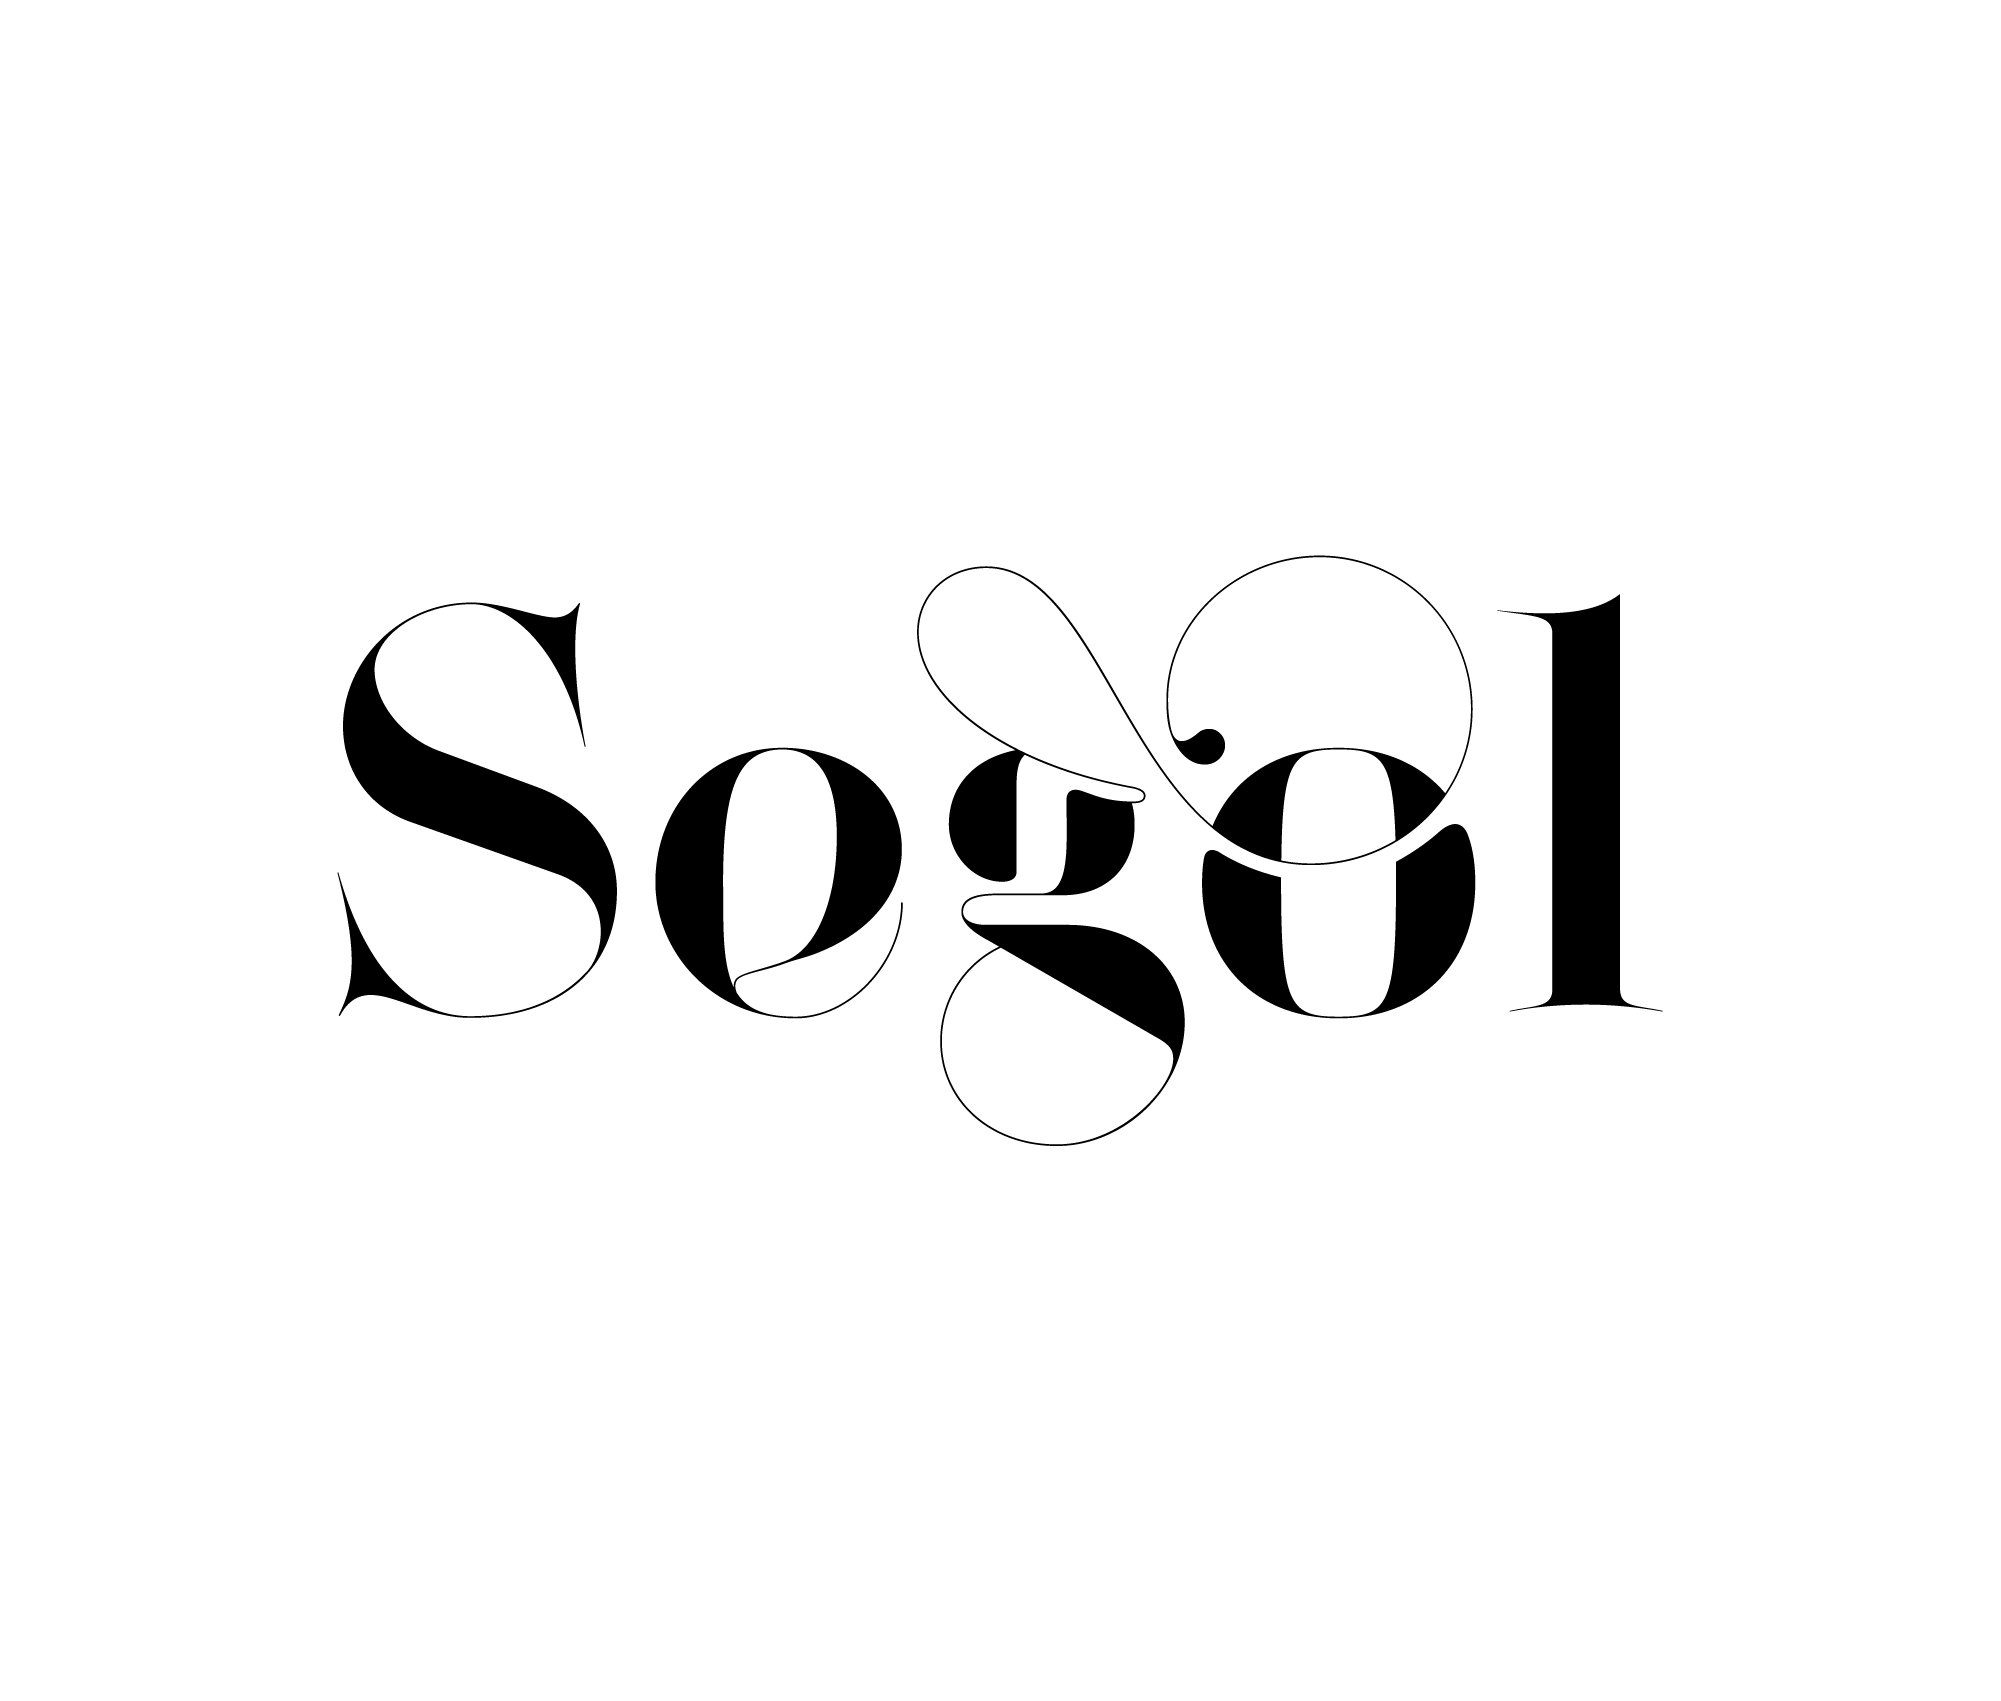 Sexy fonts, Sexy Typeface, Sexy Typography, Fashion Fonts, Fashion Typeface, Fashion Typography, Segol Typeface, Vogue fonts, Must have fonts 2023, Best fonts 2023, Fashion magazines fonts